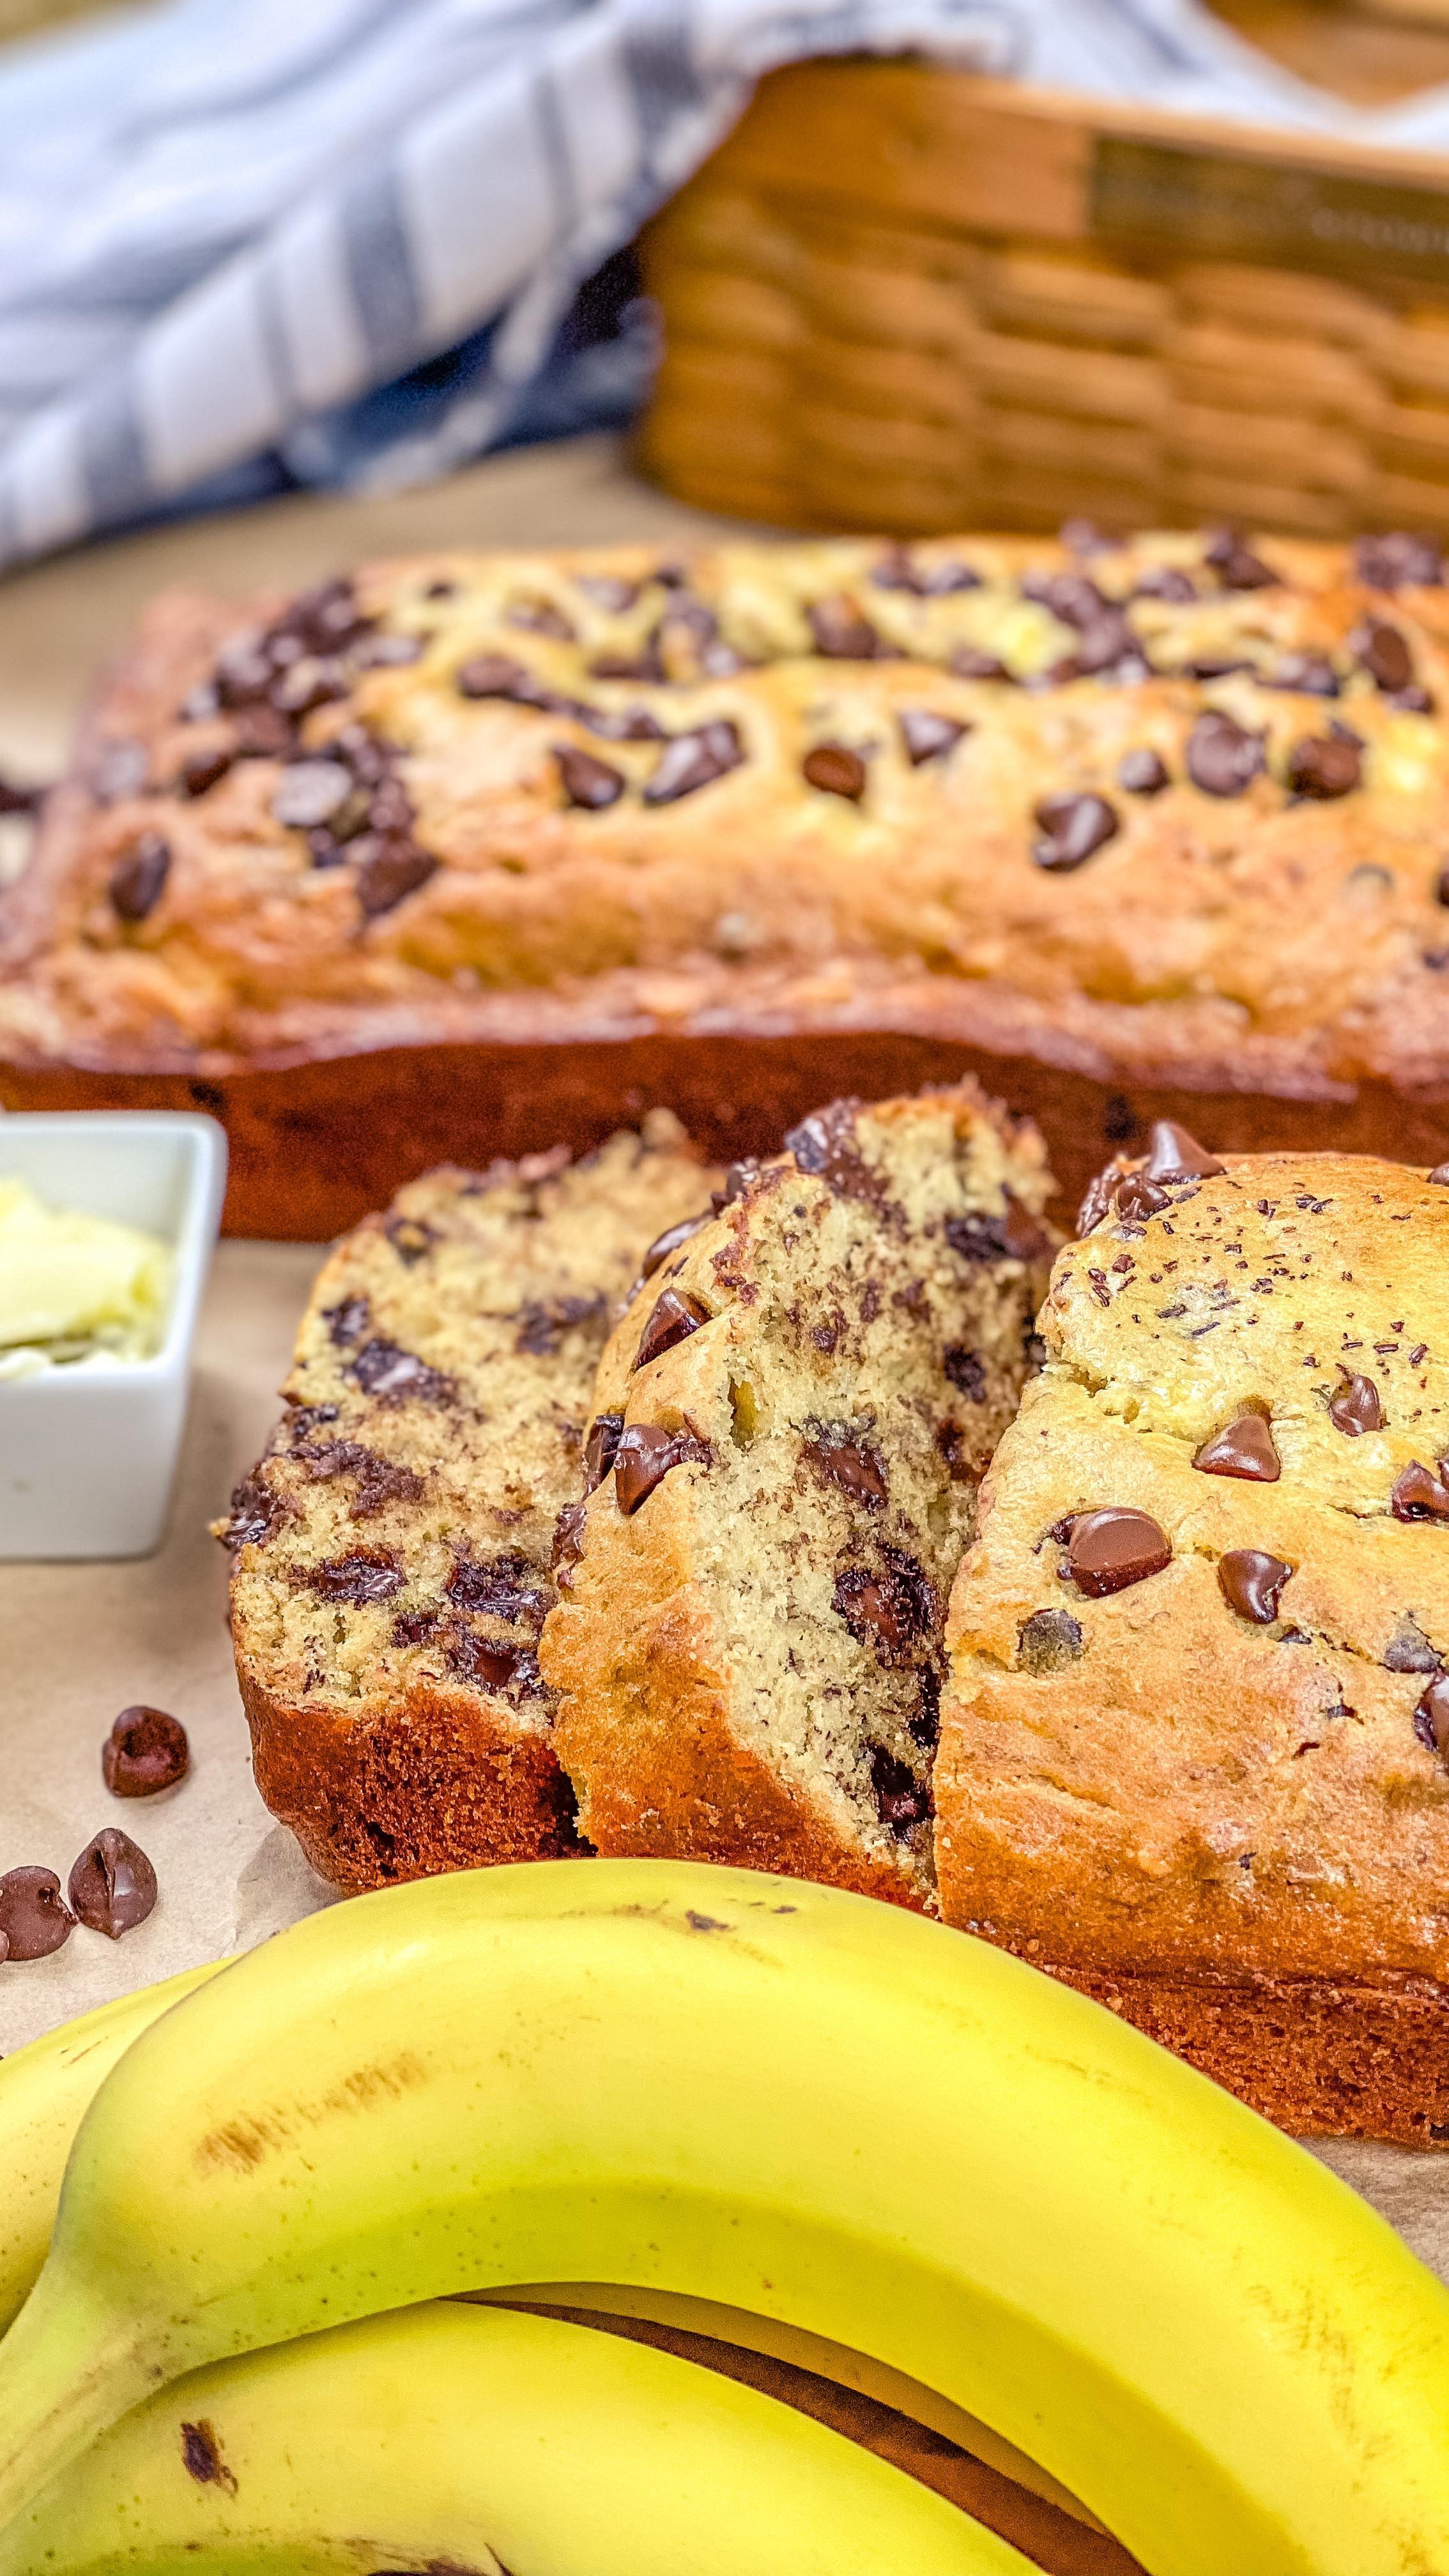 This chocolate chip banana bread is super rich, chocolatey, and scrumptious. A really great dessert recipe that your friends will love! At our household we like to spread butter on the warm bread right after it comes out of the oven. There is just nothing like it! 🤤🍫

LINK: https://simplysellskitchen.com/chocolate-chip-banana-bread/

#bananabread #weekendbaking #chocolatelove #chocolatechips #floridafoodie #sarasota #foodblogger #floridafood #chocolatedessert #indulgenteats  #bananabreadrecipe #bananaloaf #chocolatebananabread #easyrecipesathome #onebowl #quickbread #foodblogeats #bakedfromscratch #dessertaddict #homemadedessert #dessertlove #bakingcooking #dessertlovers  #homemadewithlove #obsession #bakingday #prettyfood #dessertrecipes #weekendbaking #chocolateoverload #homemadewithlove @foodblogfeed @thebakefeed @thefeedfeed